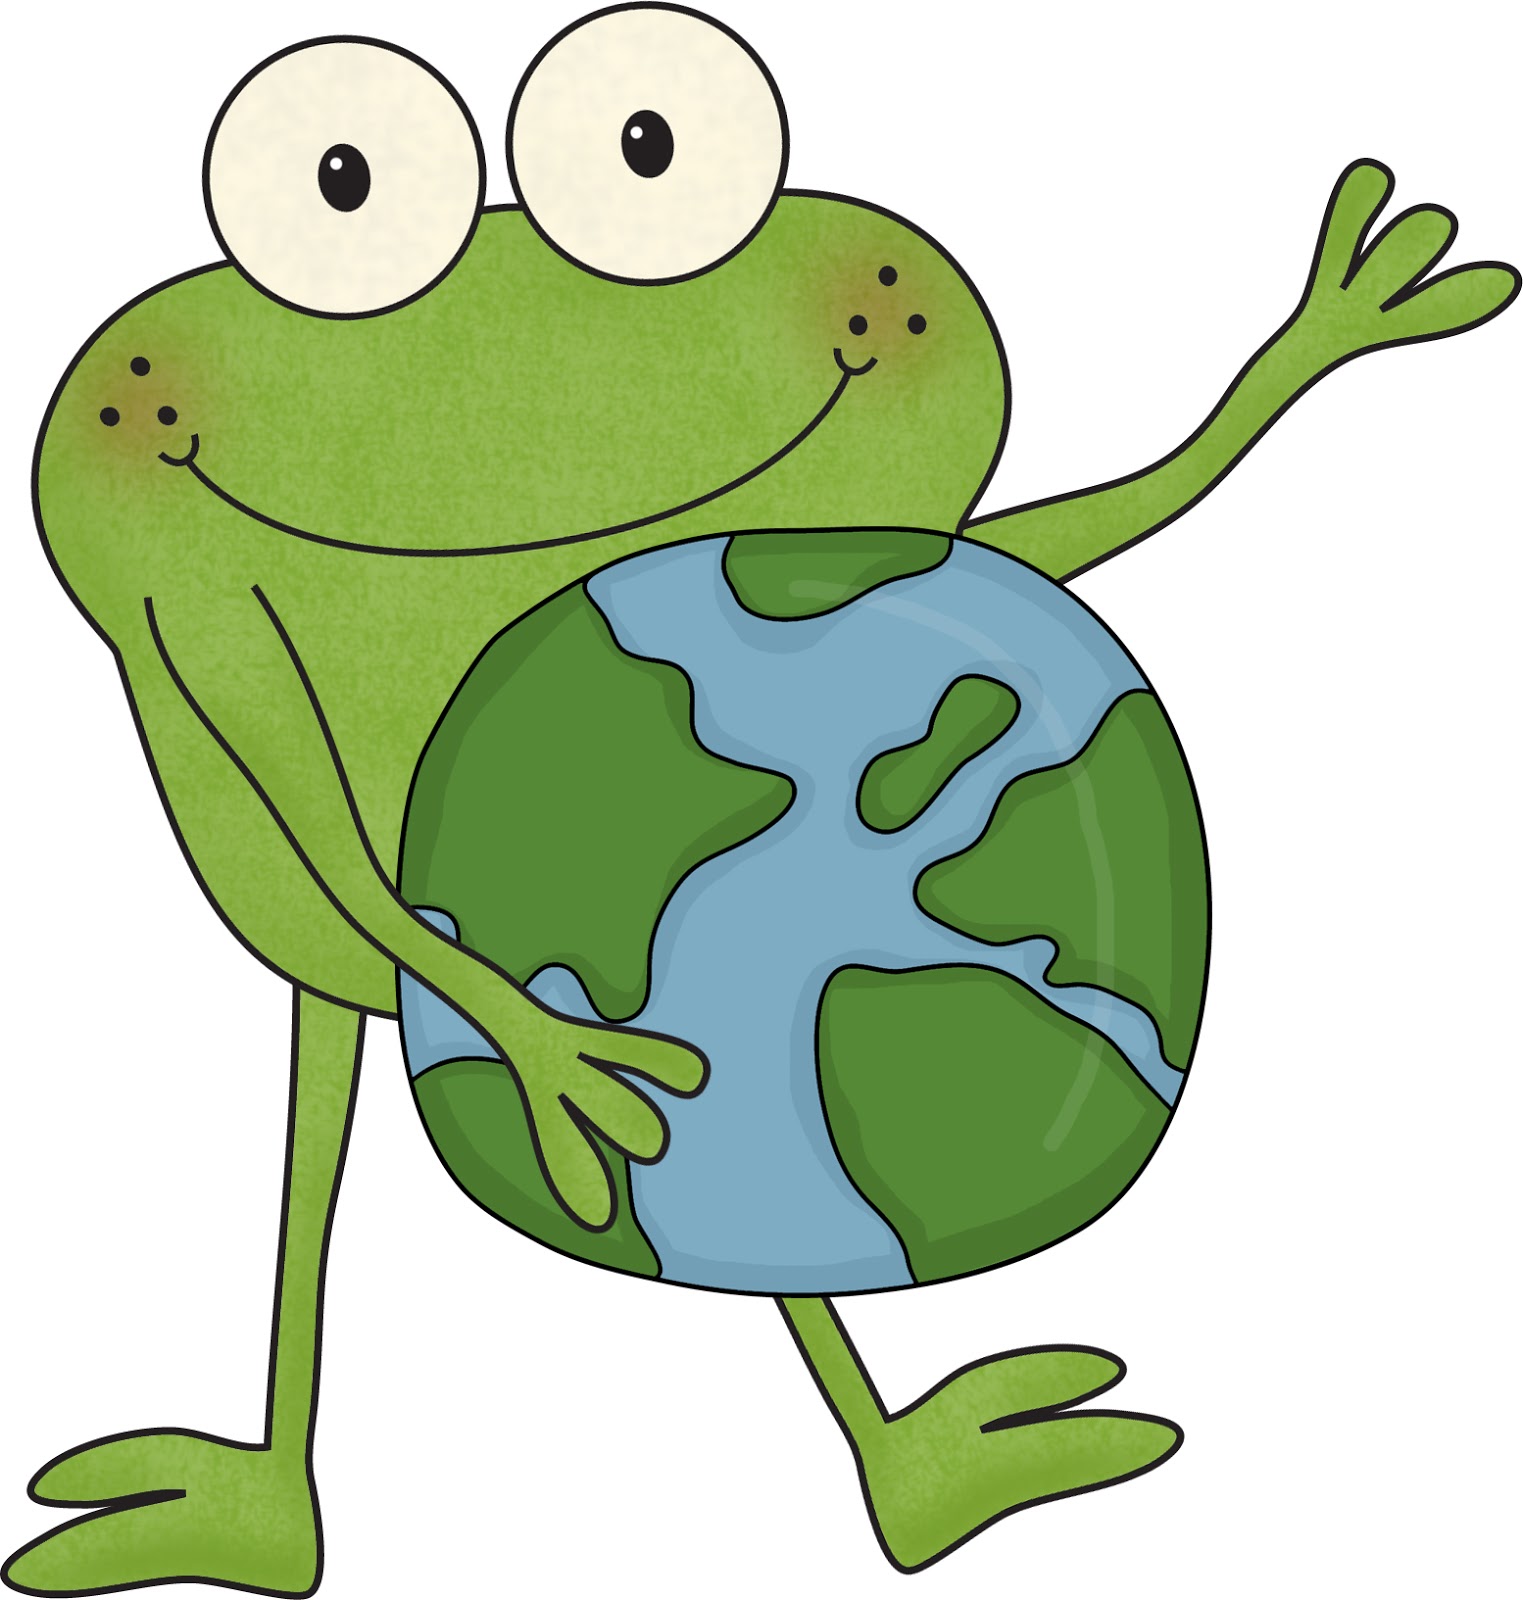 Earth day clip art images free clipart